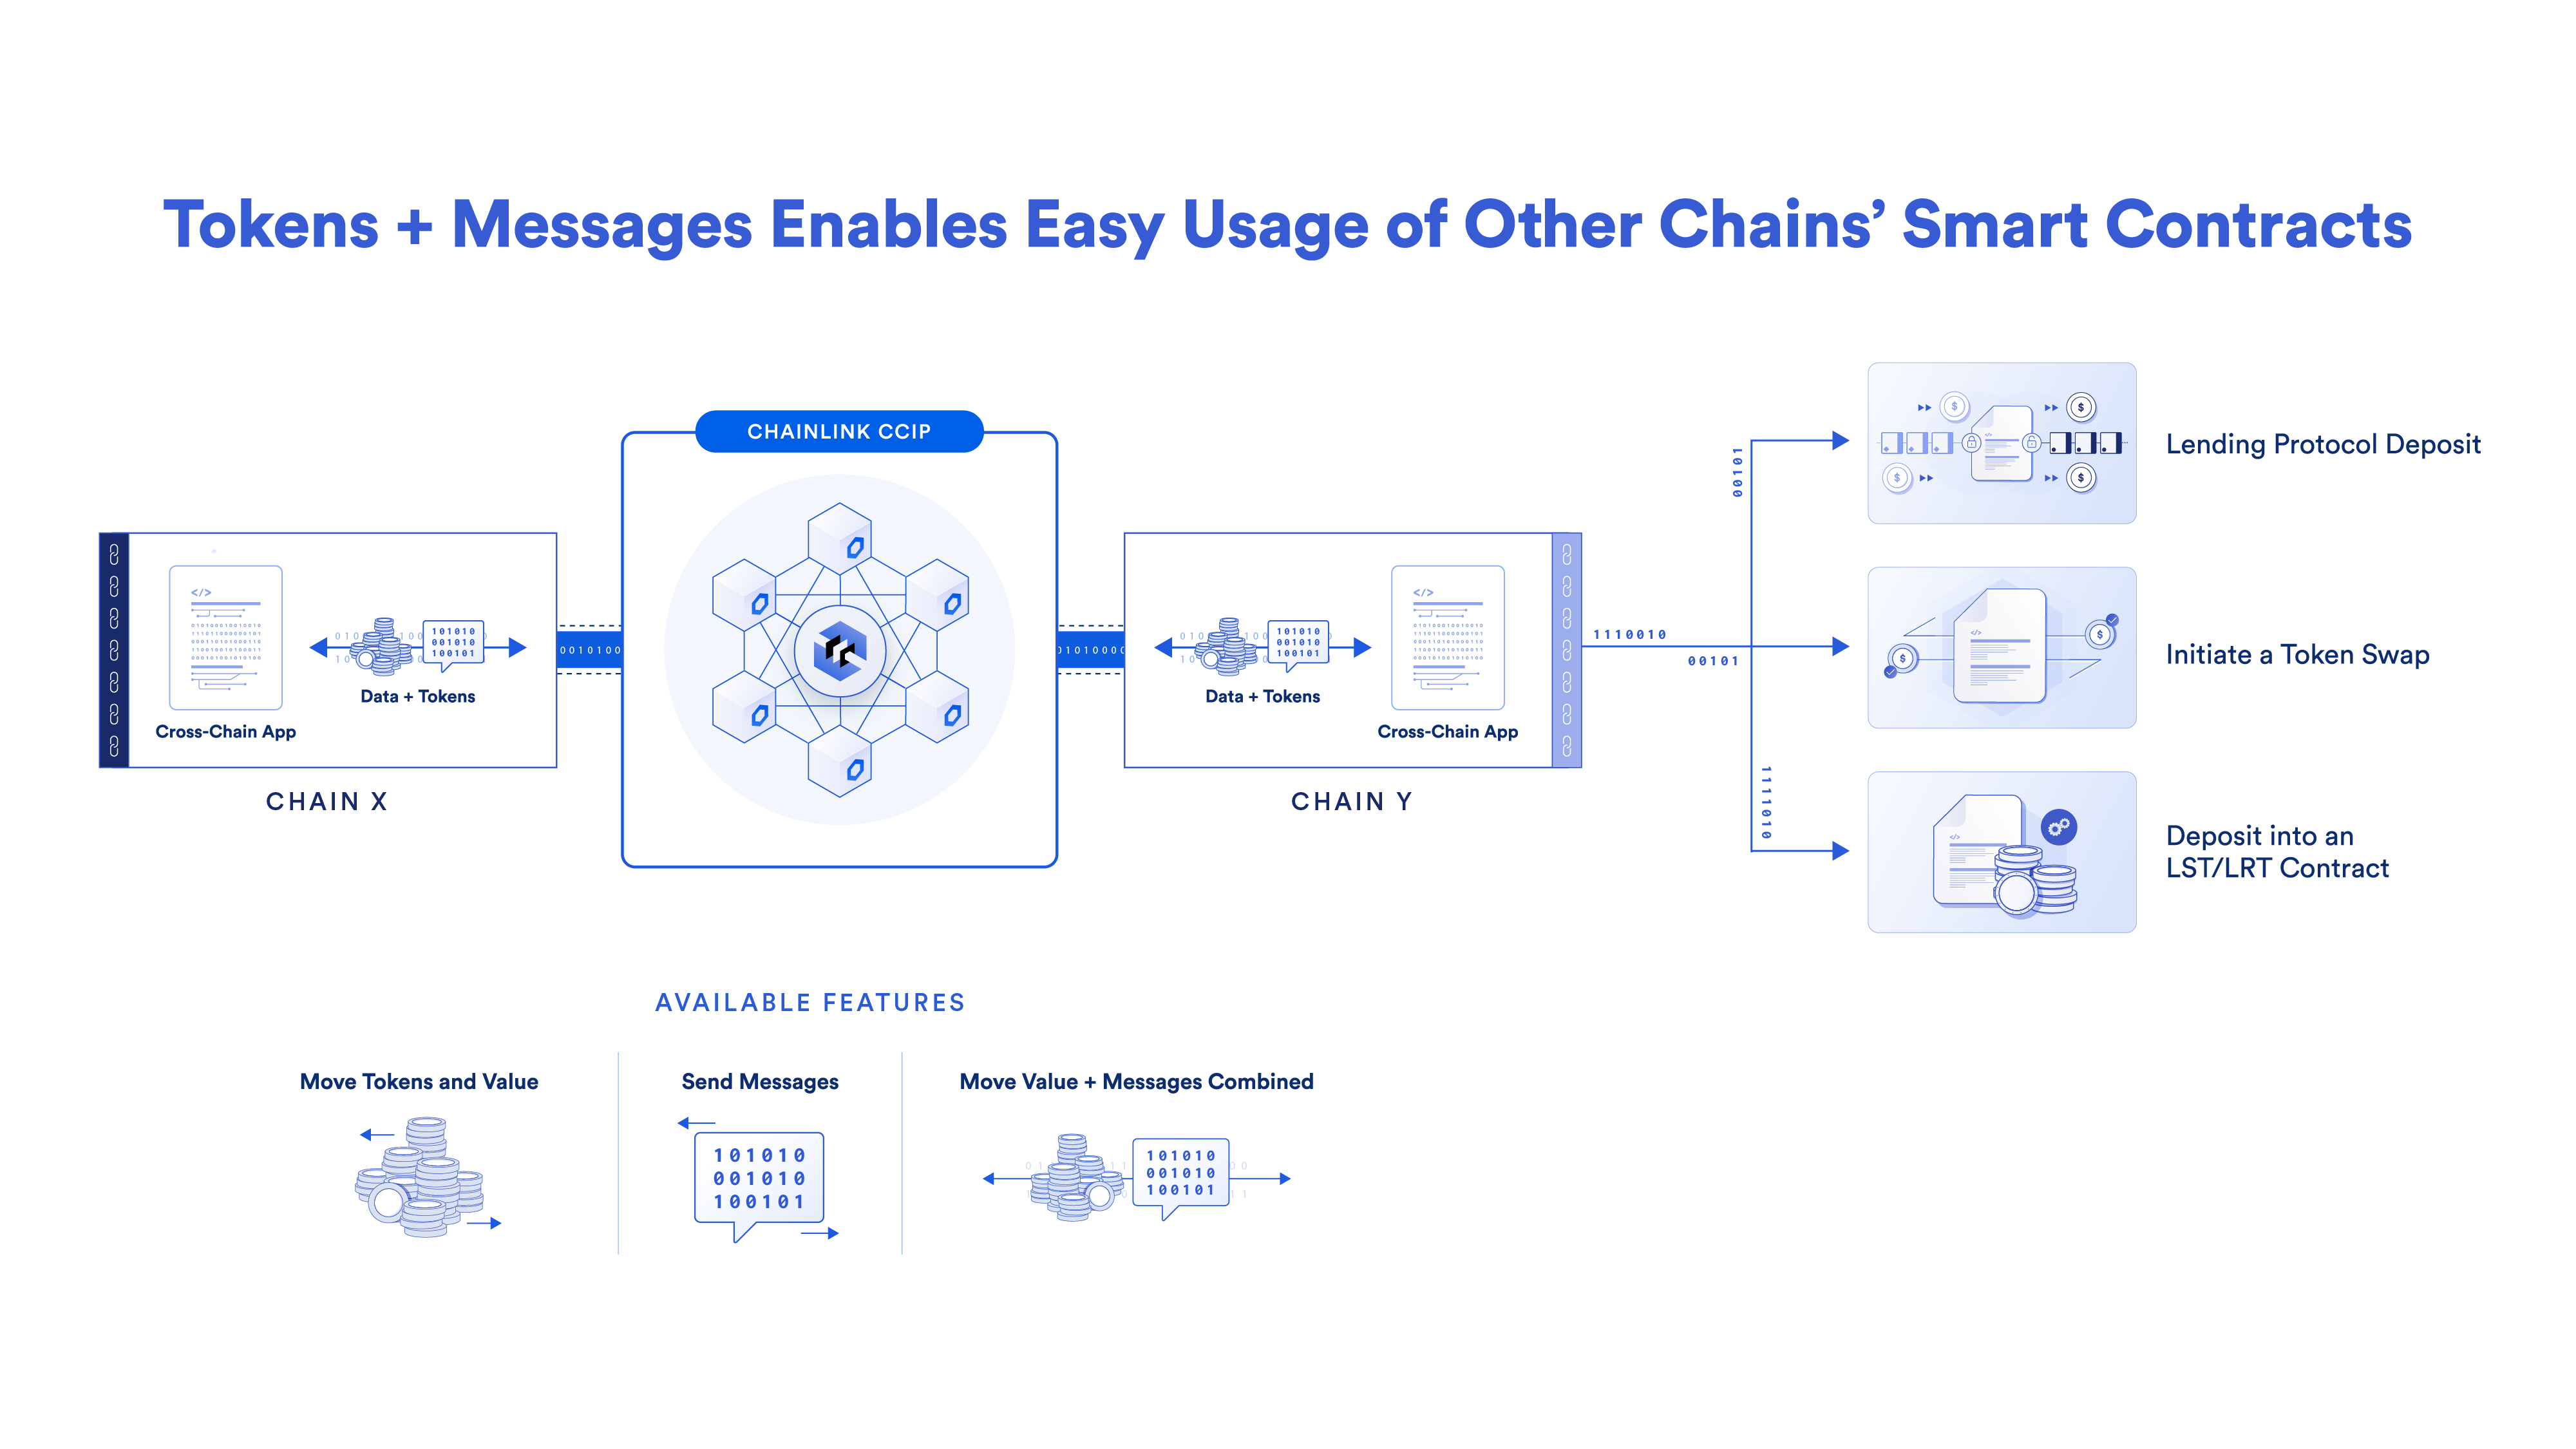 Chainlink CCIP’s Programmable Token Transfers combine the transfer of value and messages for more advanced cross-chain functionalities.